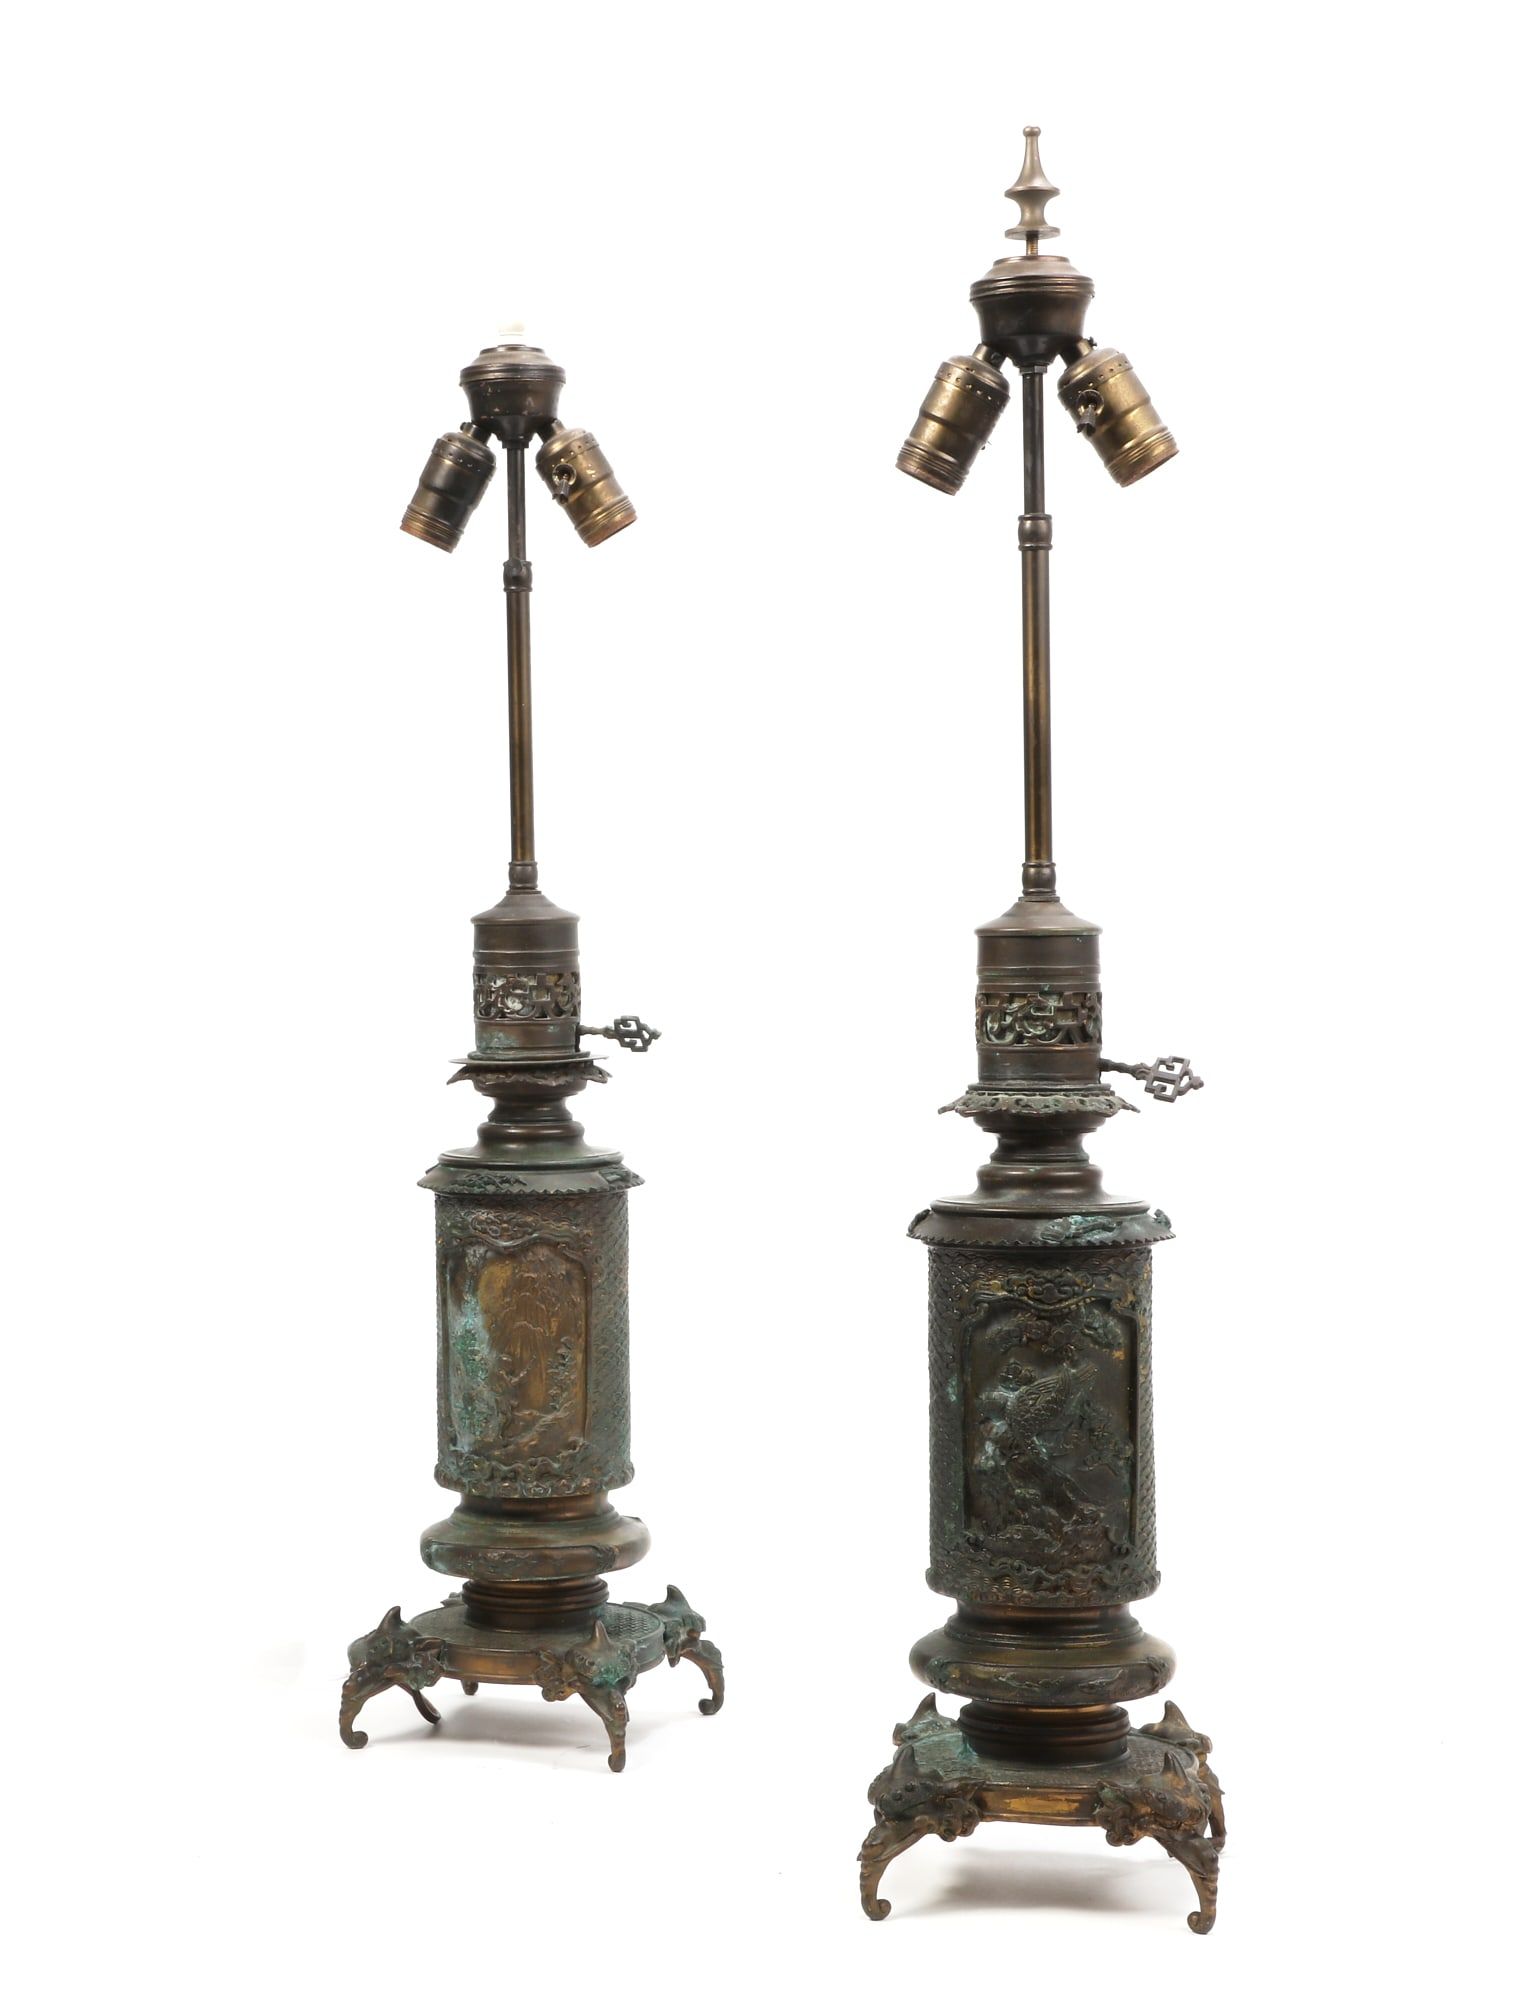 A PAIR OF FRENCH BRONZE JAPONESQUE